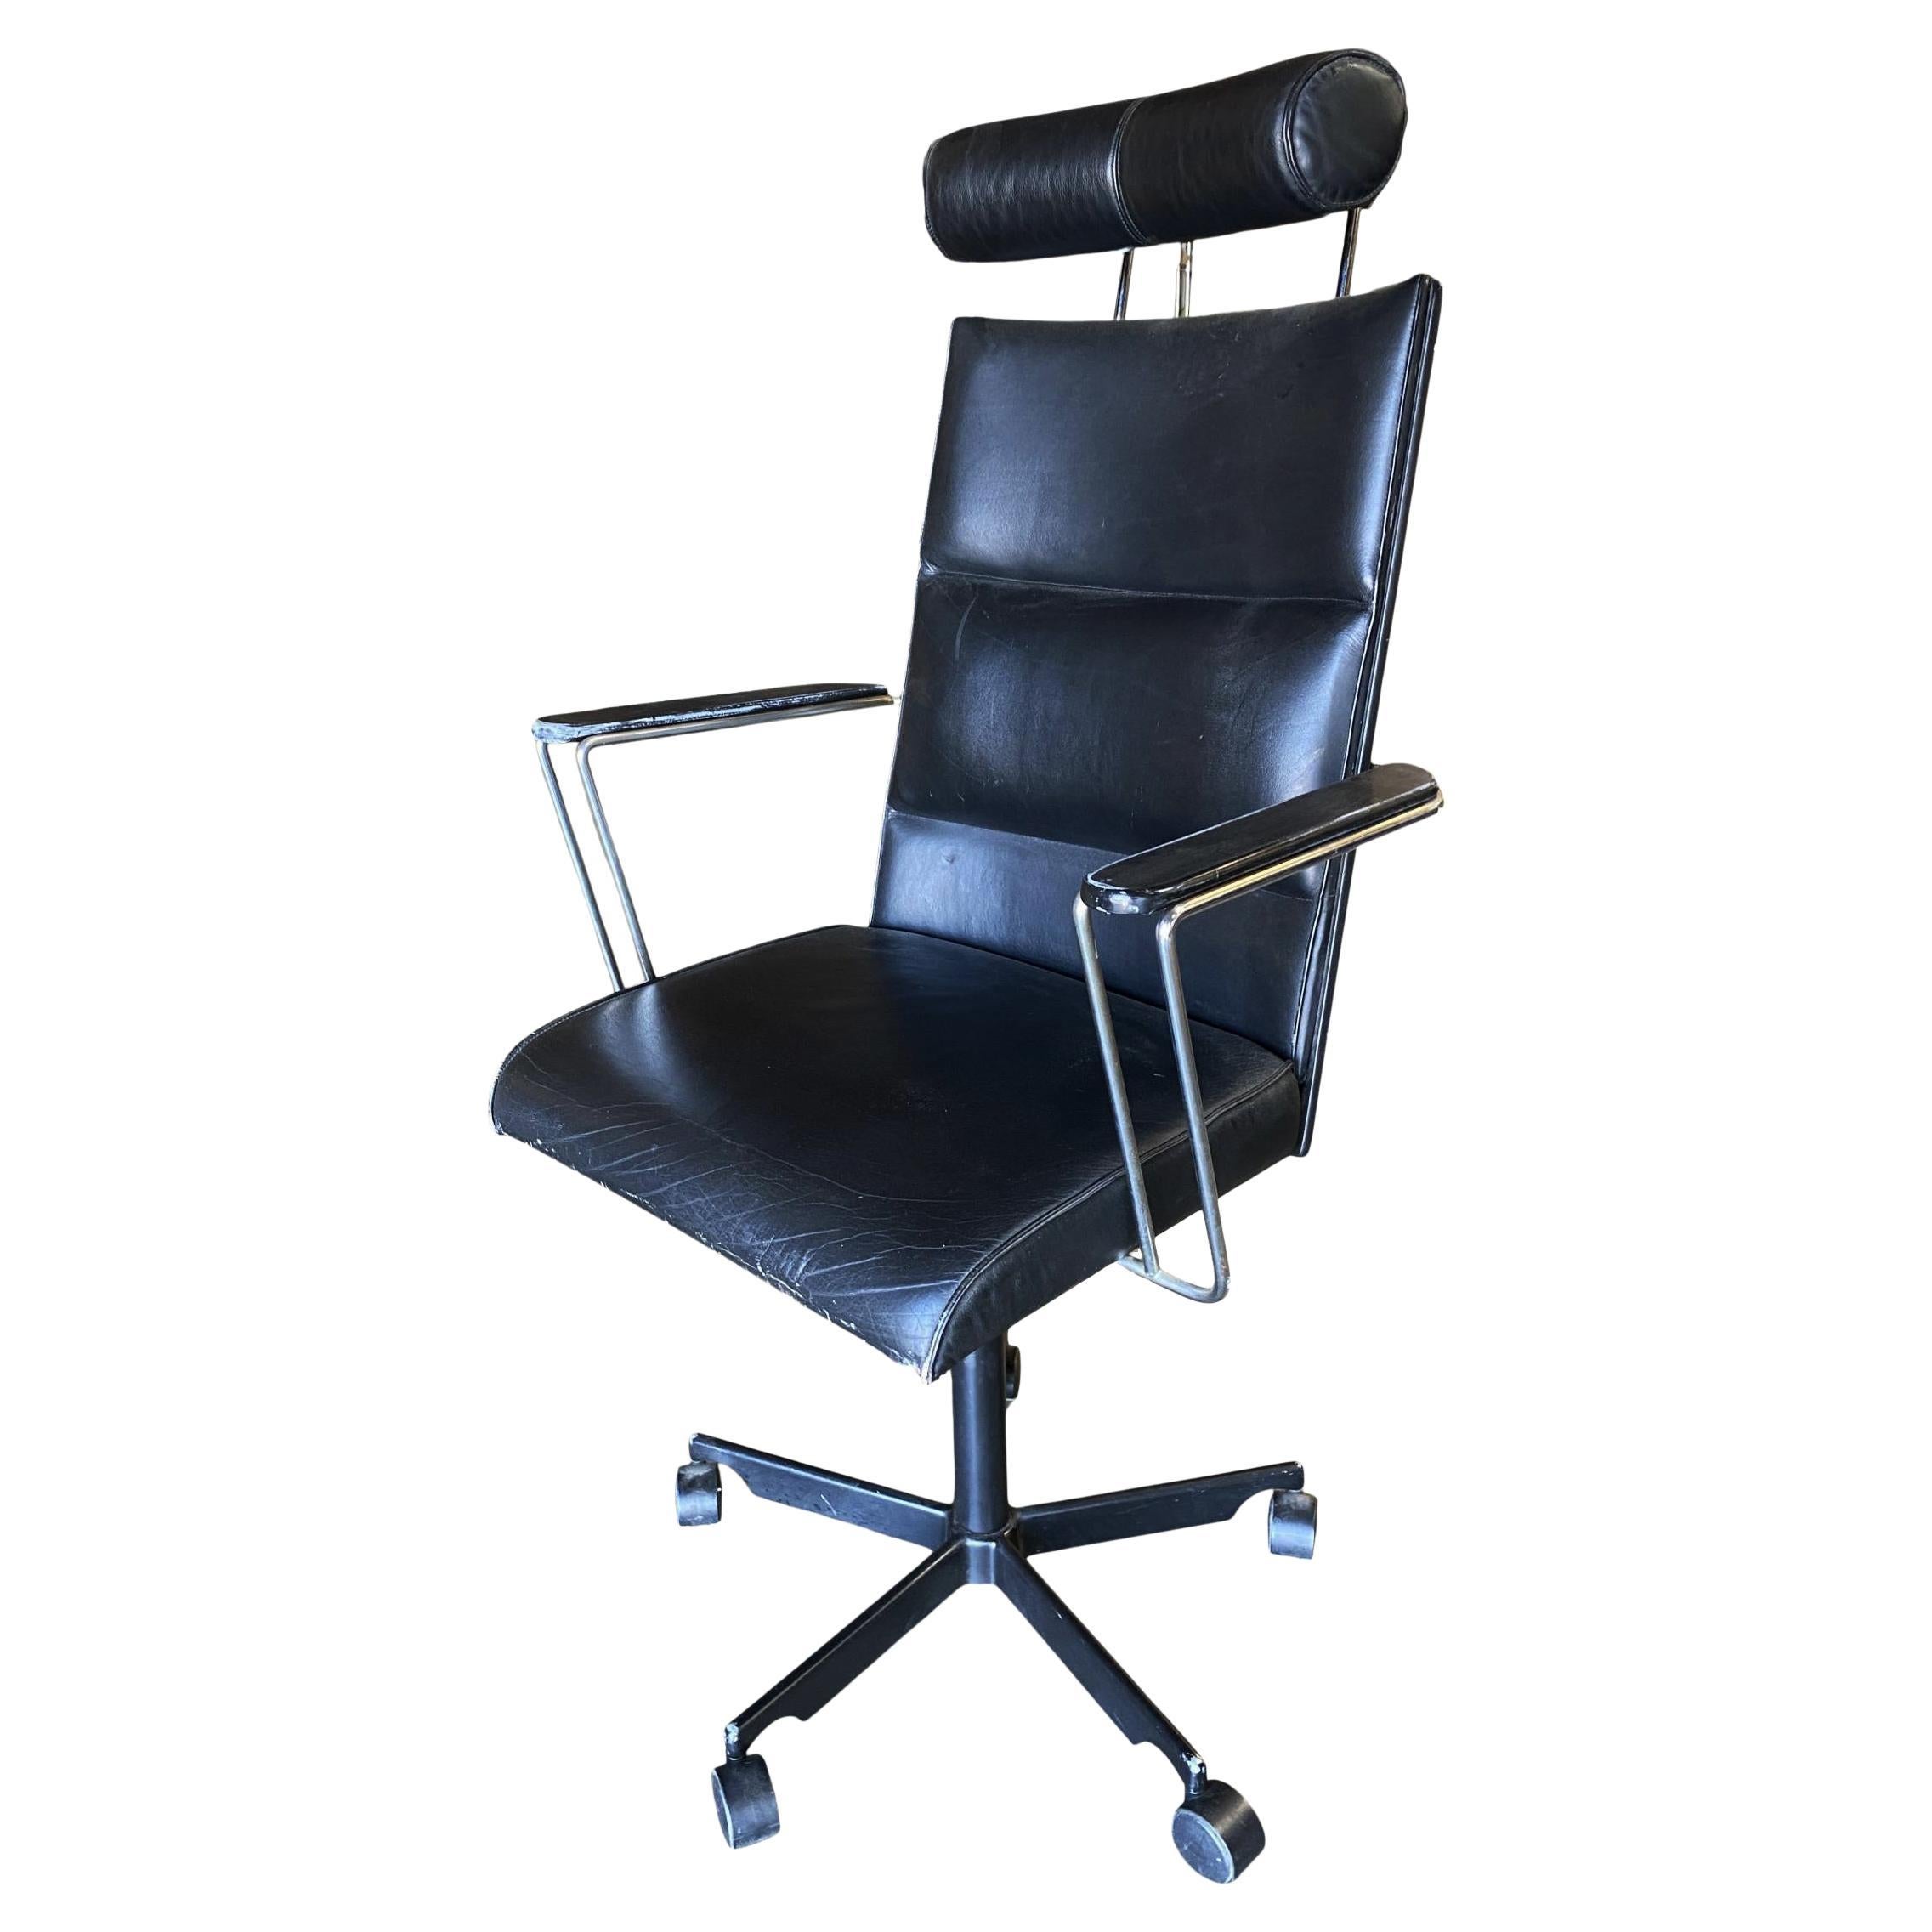 1980's Danish Modern Black and Chrome Executive Desk Chair by Kevi